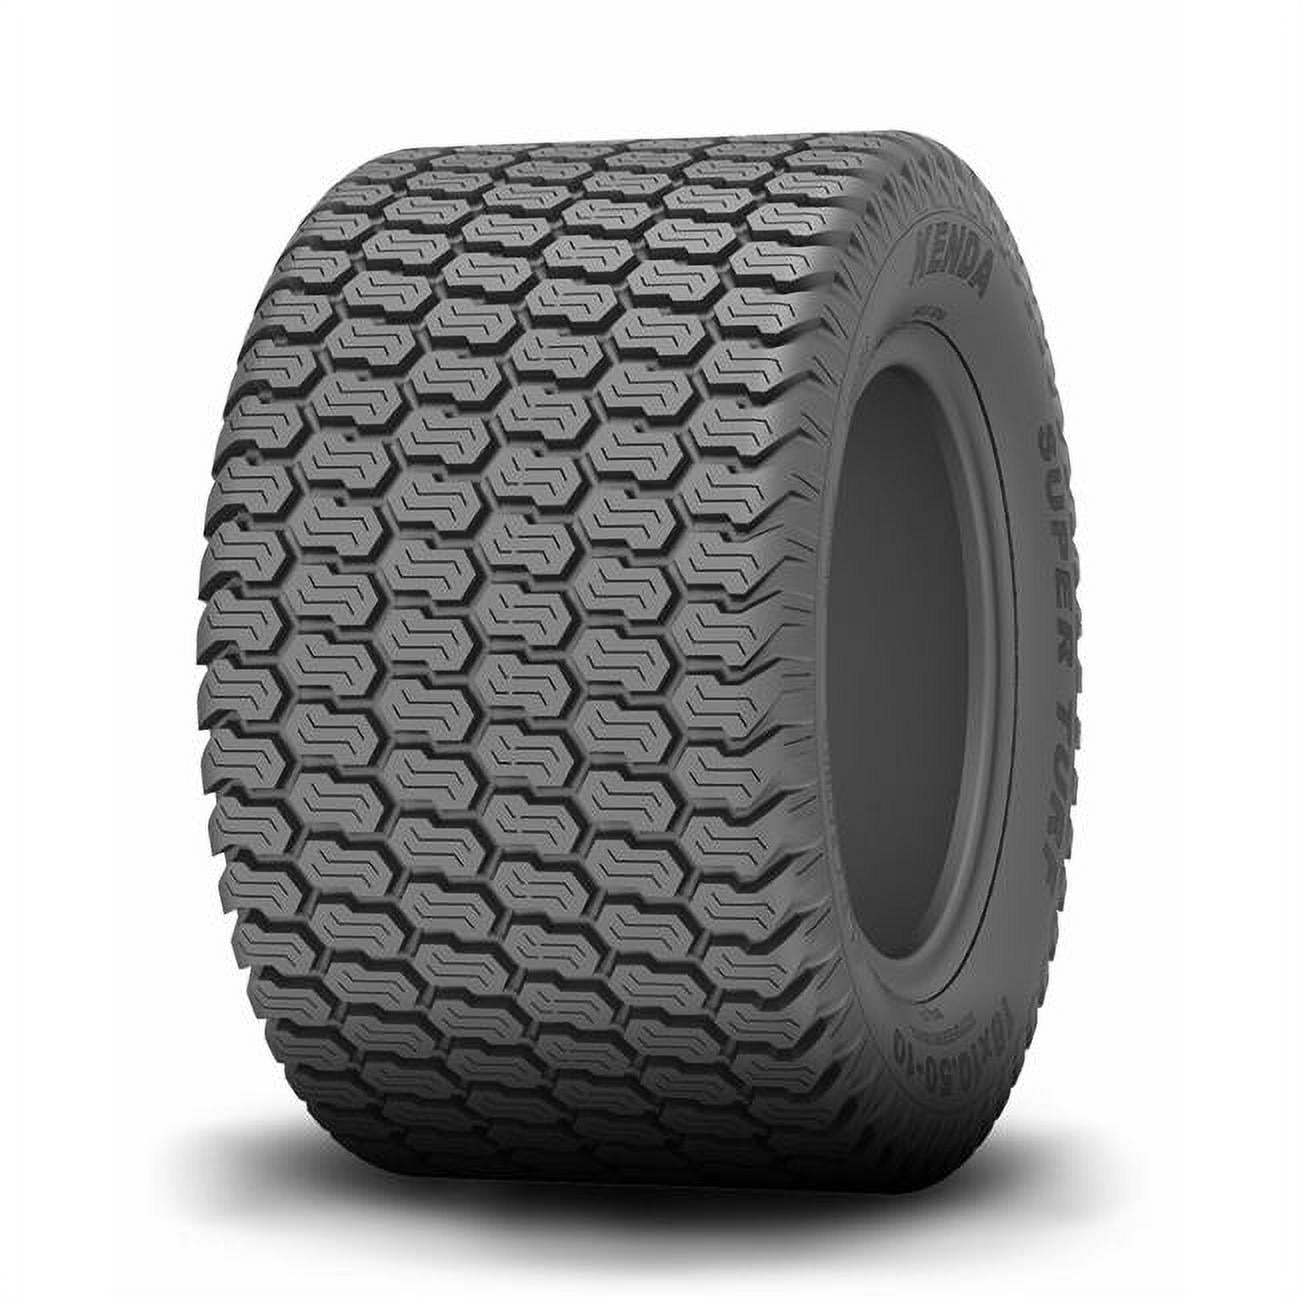 Two 20x8.00-8 Deestone D265 Turf Tubeless Tires  DS7042 2